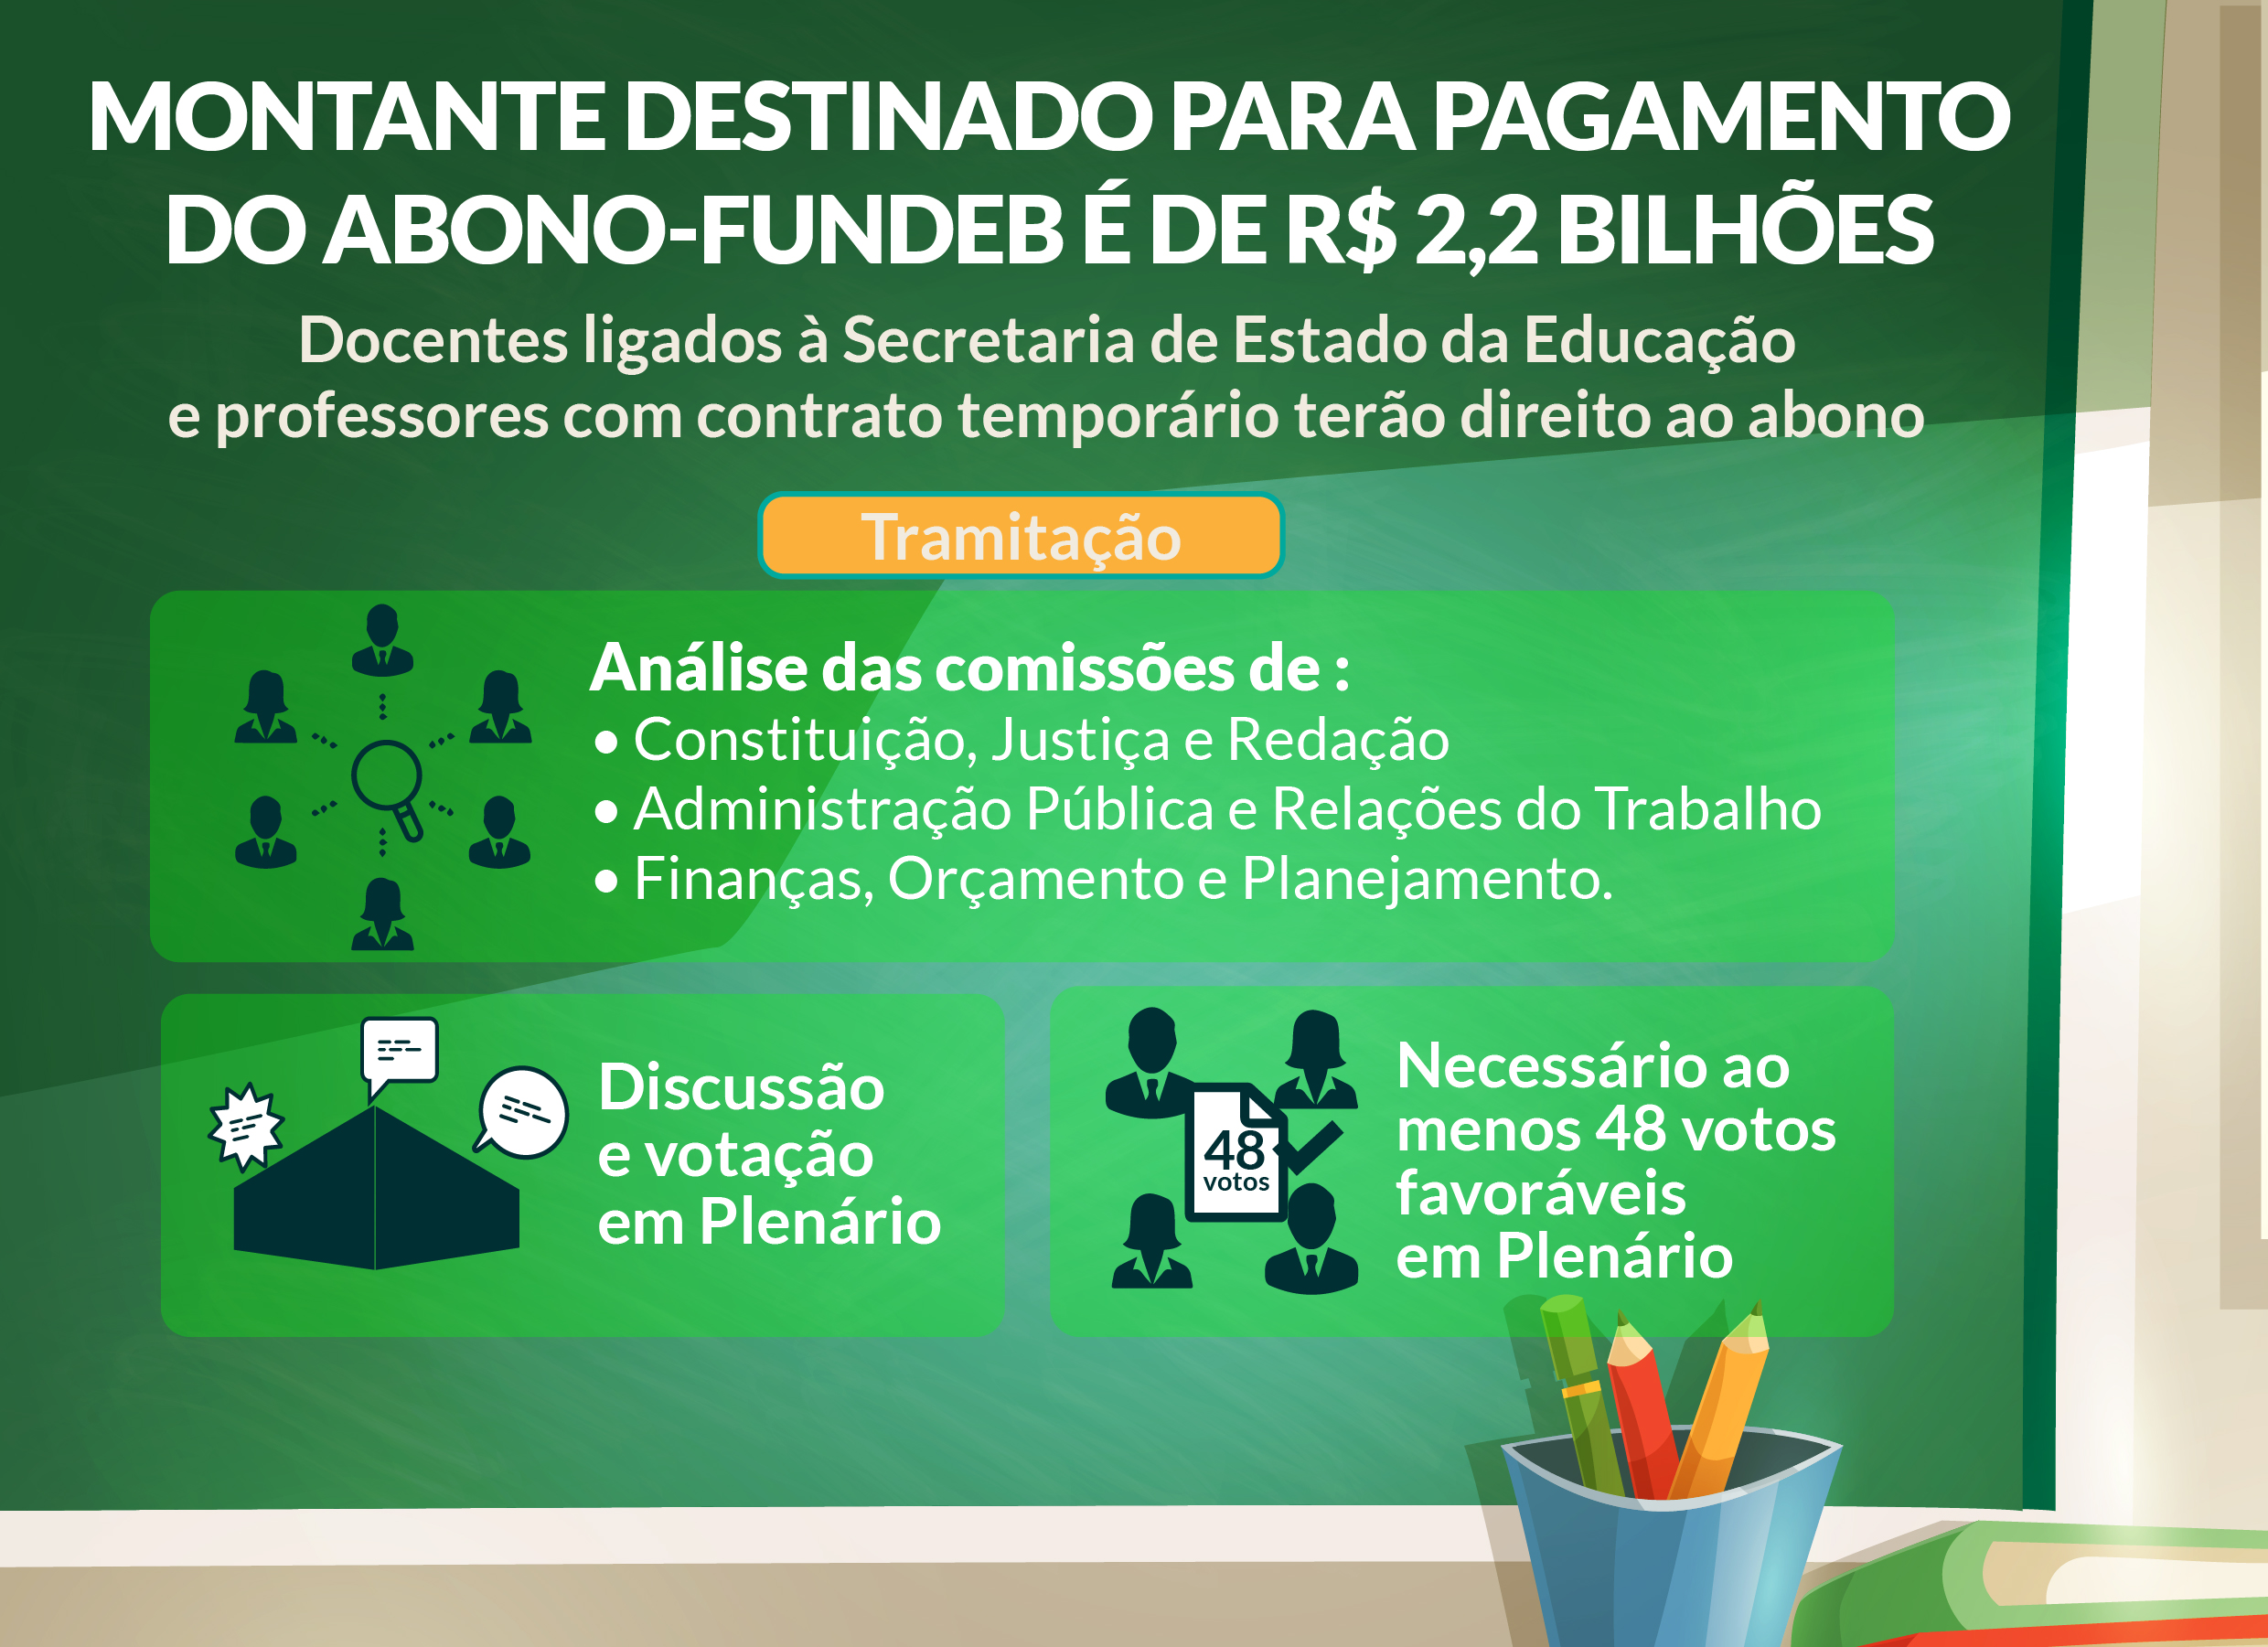 Infográfico <a style='float:right' href='https://www3.al.sp.gov.br/repositorio/noticia/N-11-2021/fg277715.jpg' target=_blank><img src='/_img/material-file-download-white.png' width='14px' alt='Clique para baixar a imagem'></a>